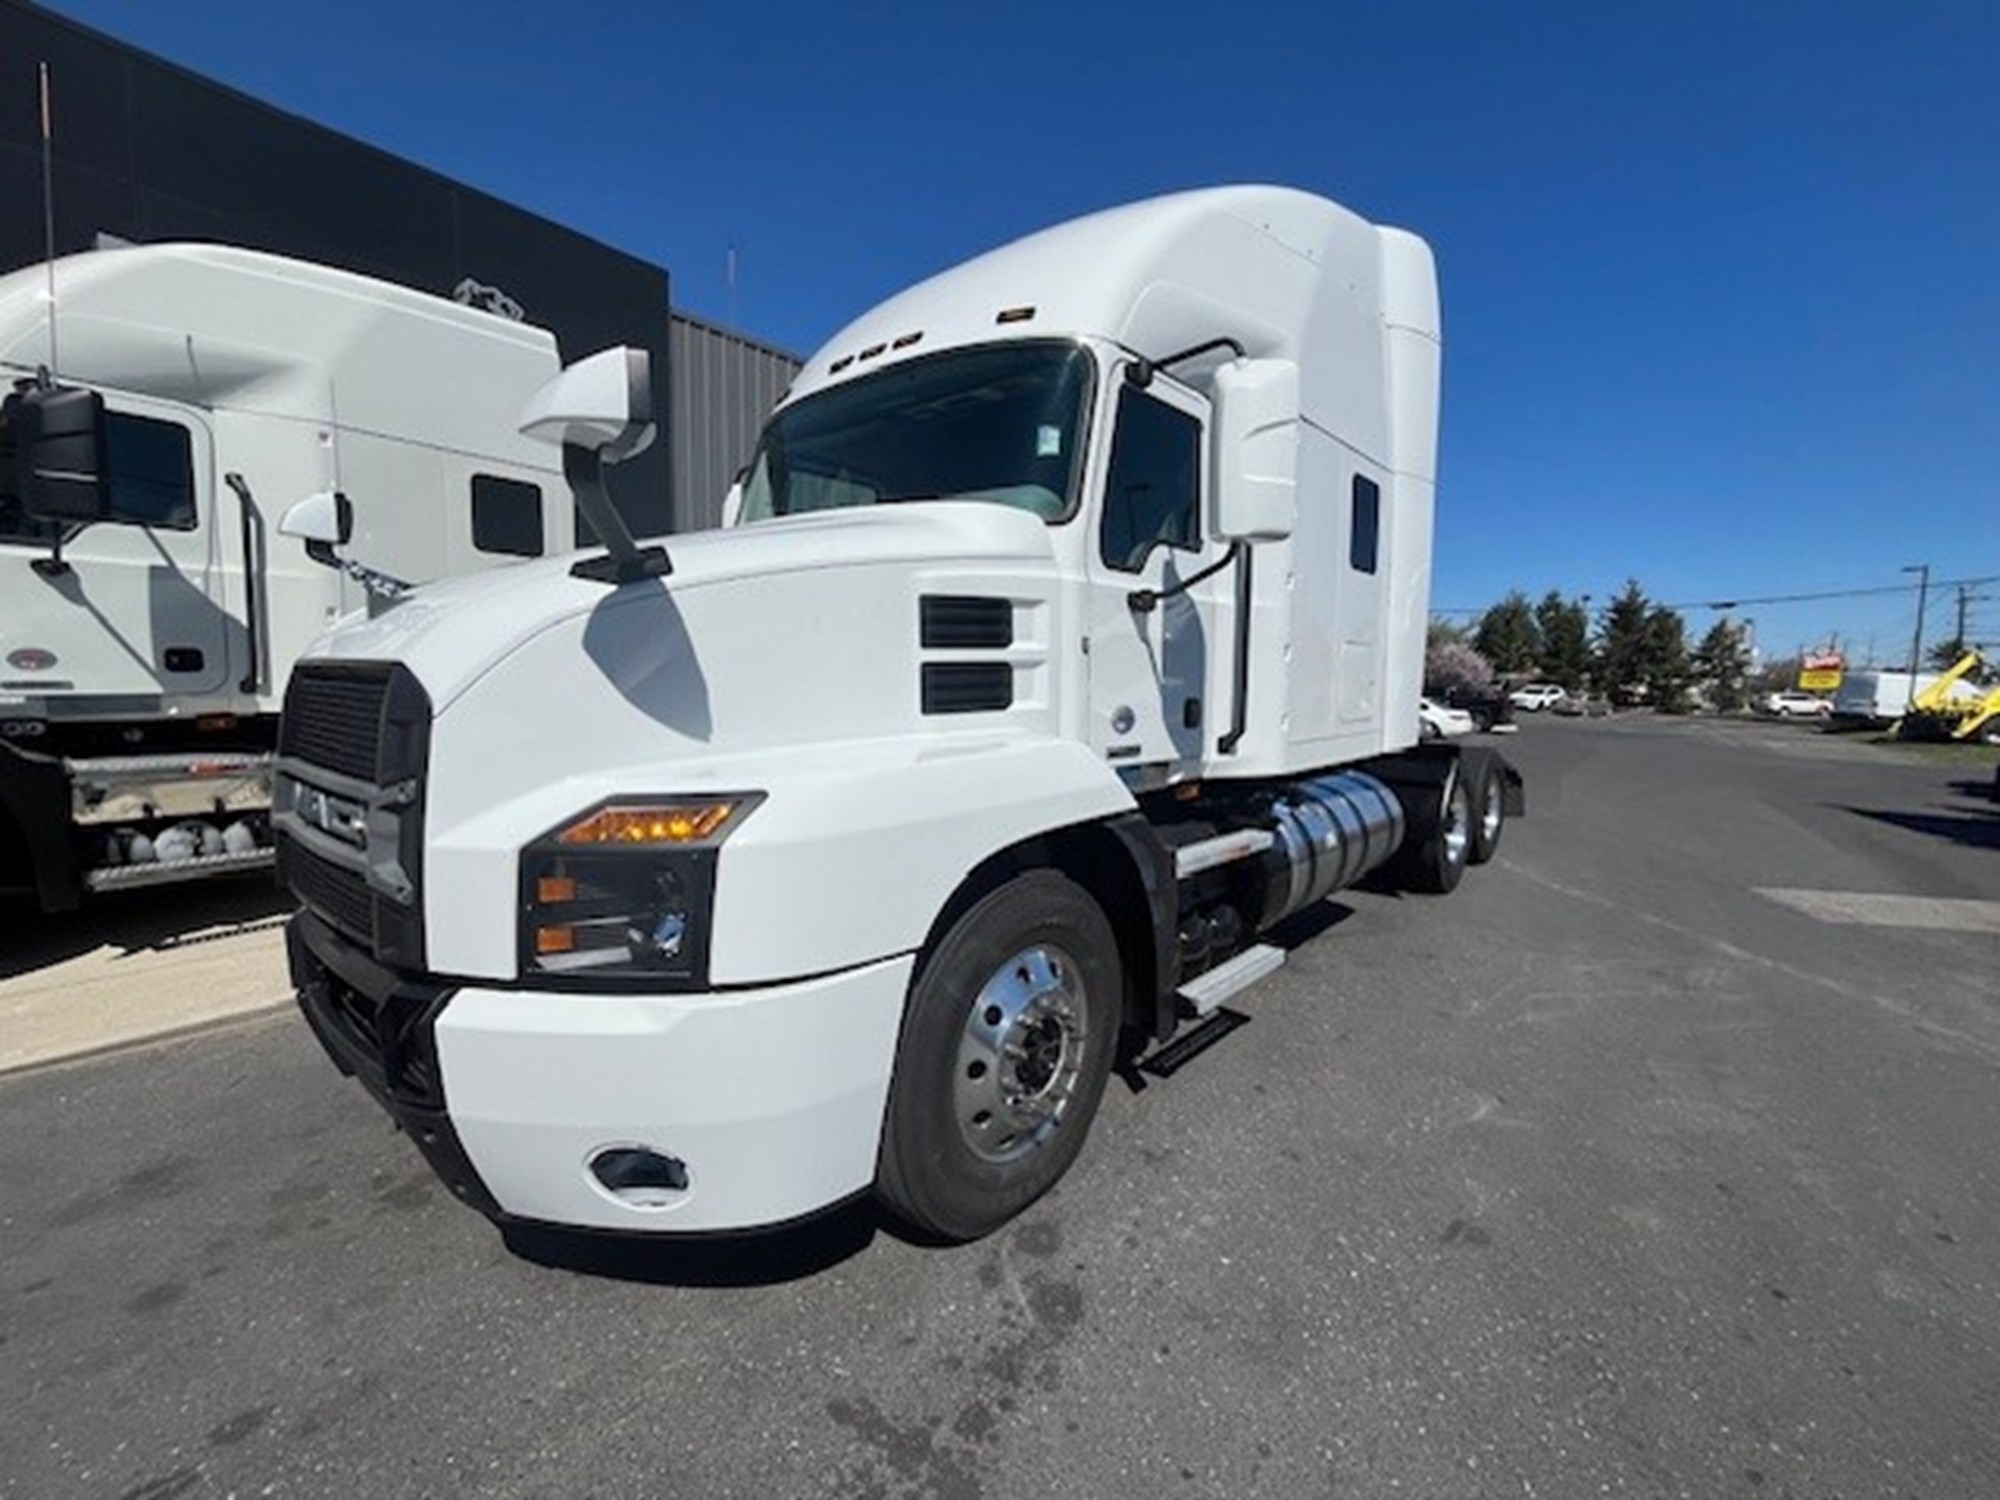 Used Truck Inventory - 1001662 01 - 19